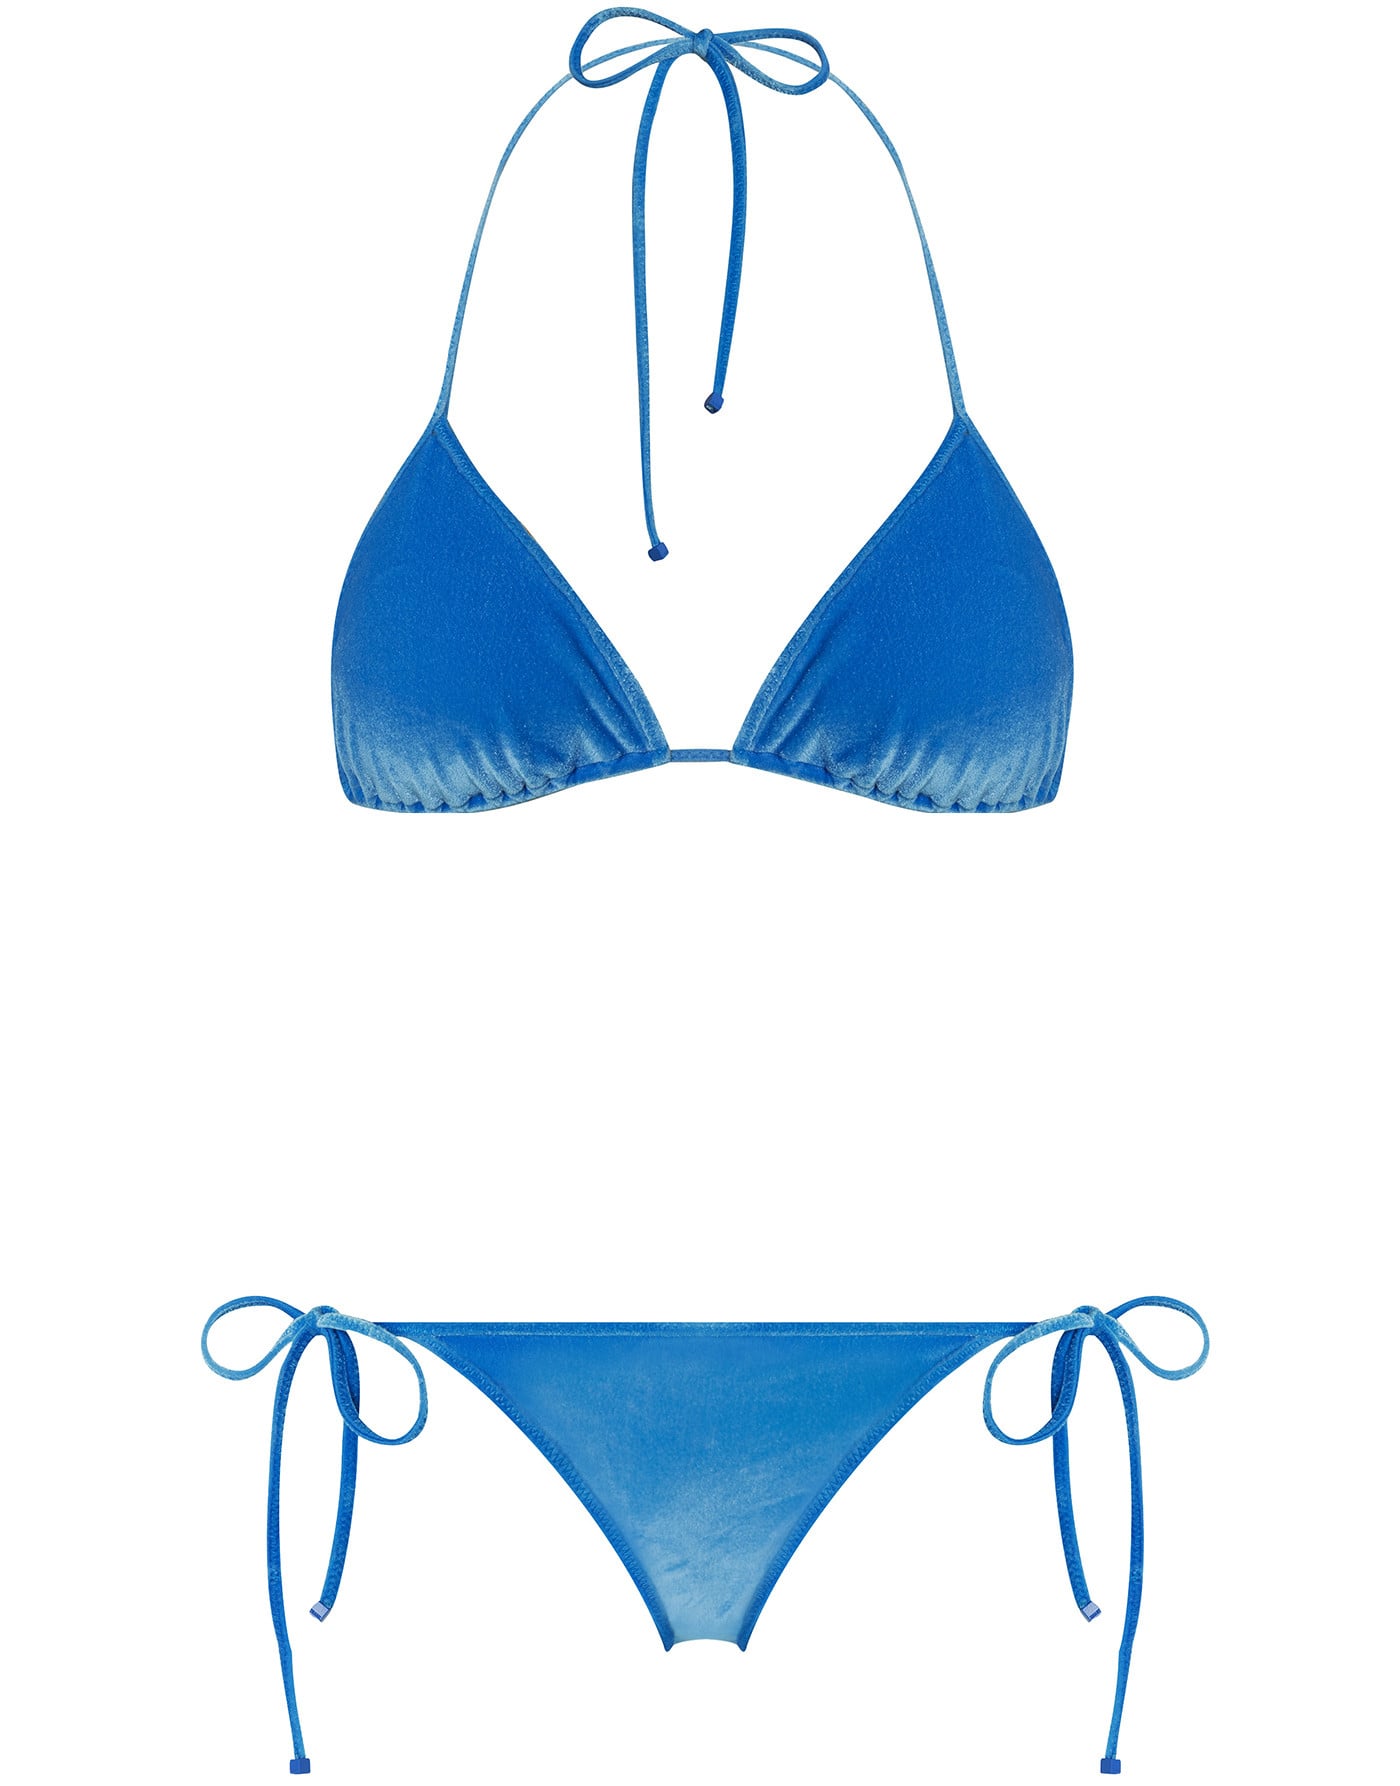 TRIANGL SWIMWEAR on Instagram: “BLUE ON BLUE: The New Colors